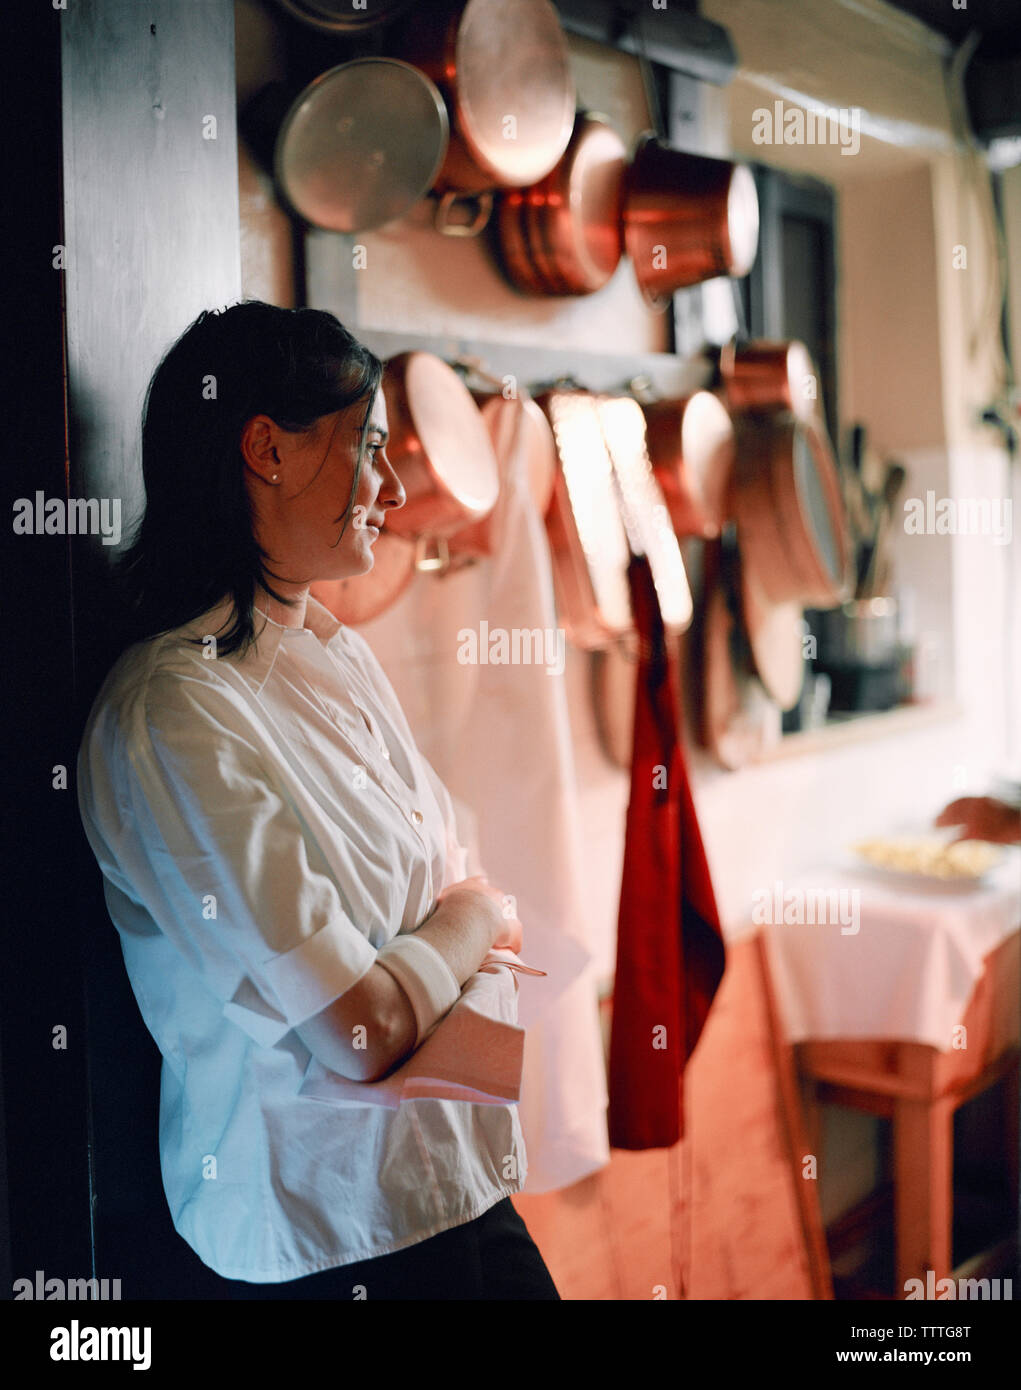 ITALY, Soave, waitress standing with arms crossed in kitchen of Ristorante Groto De Corgnan. Stock Photo